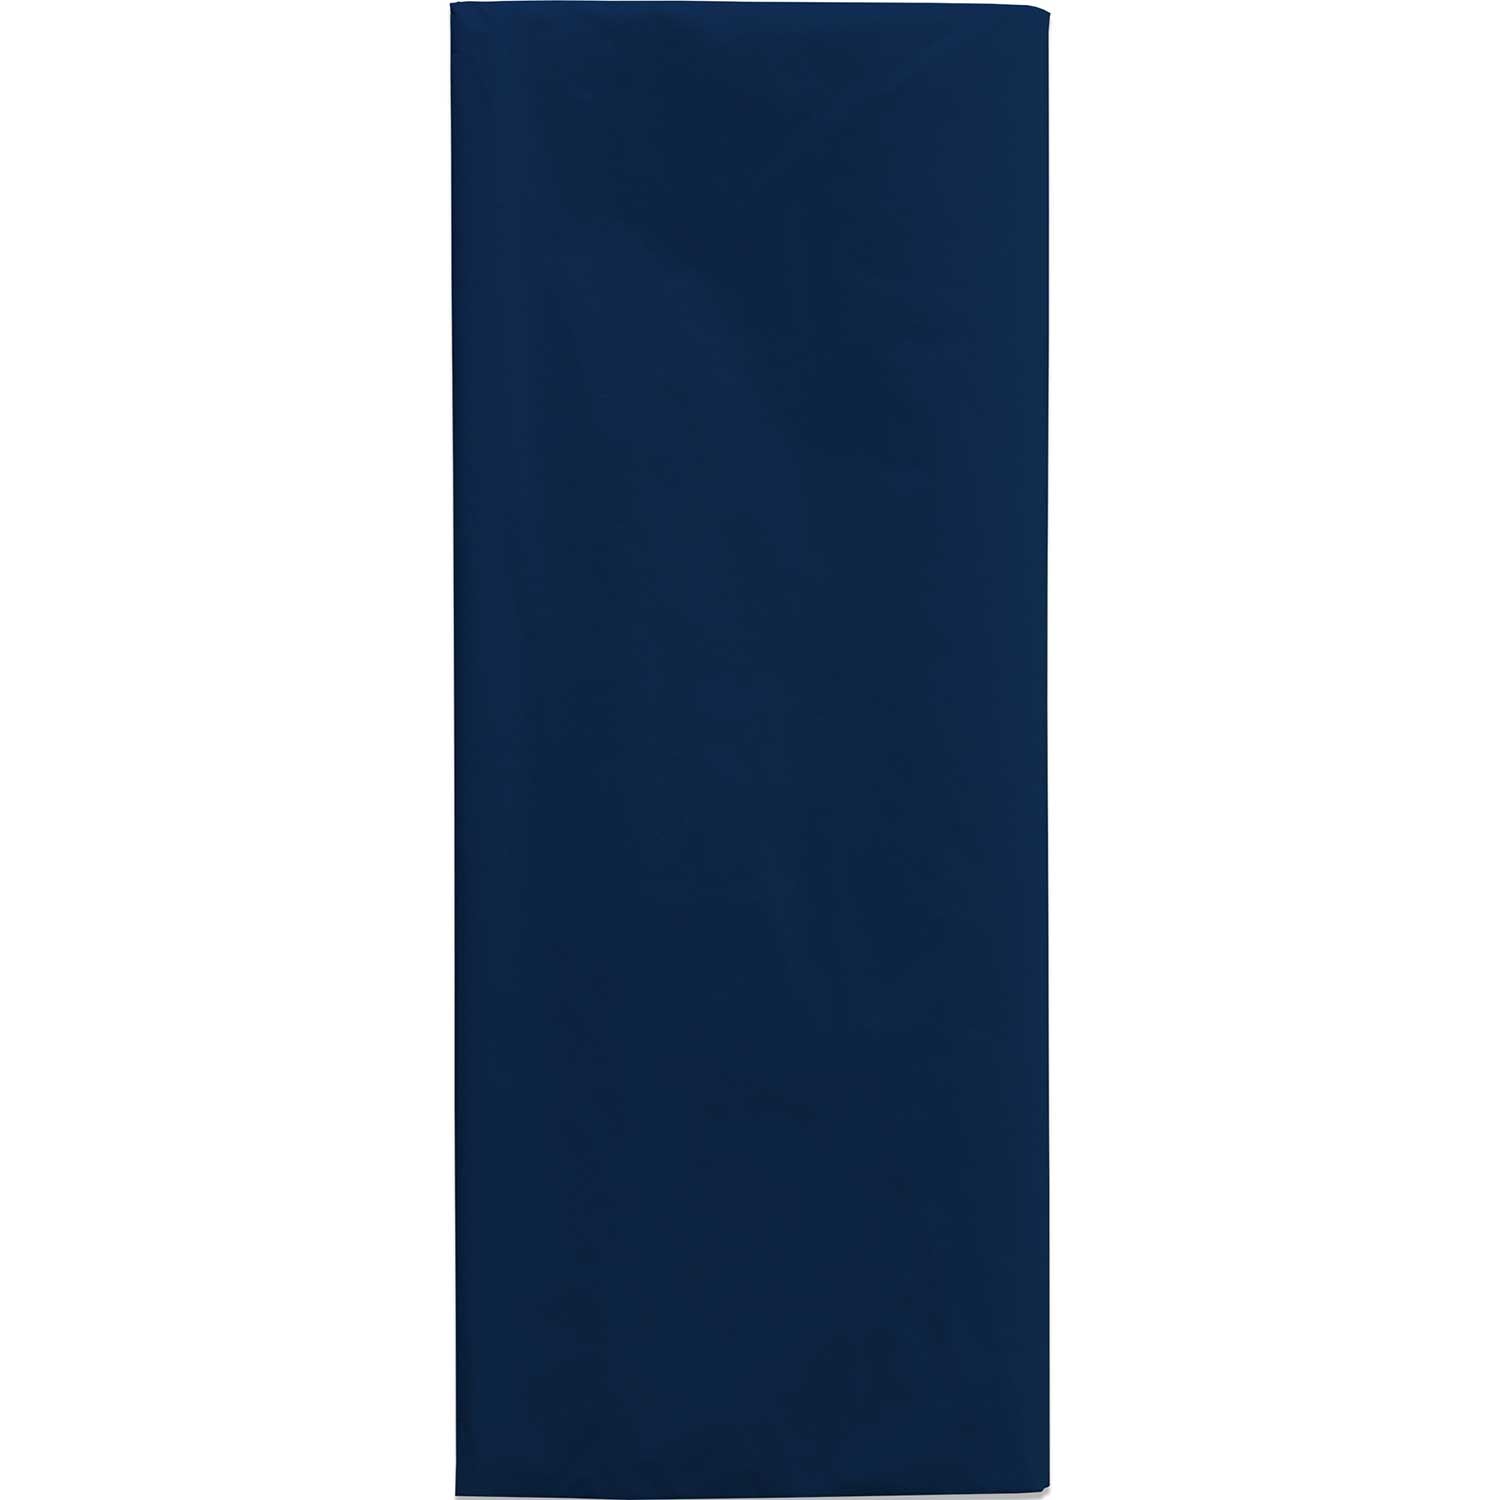 Navy Tissue Paper, 8 sheets